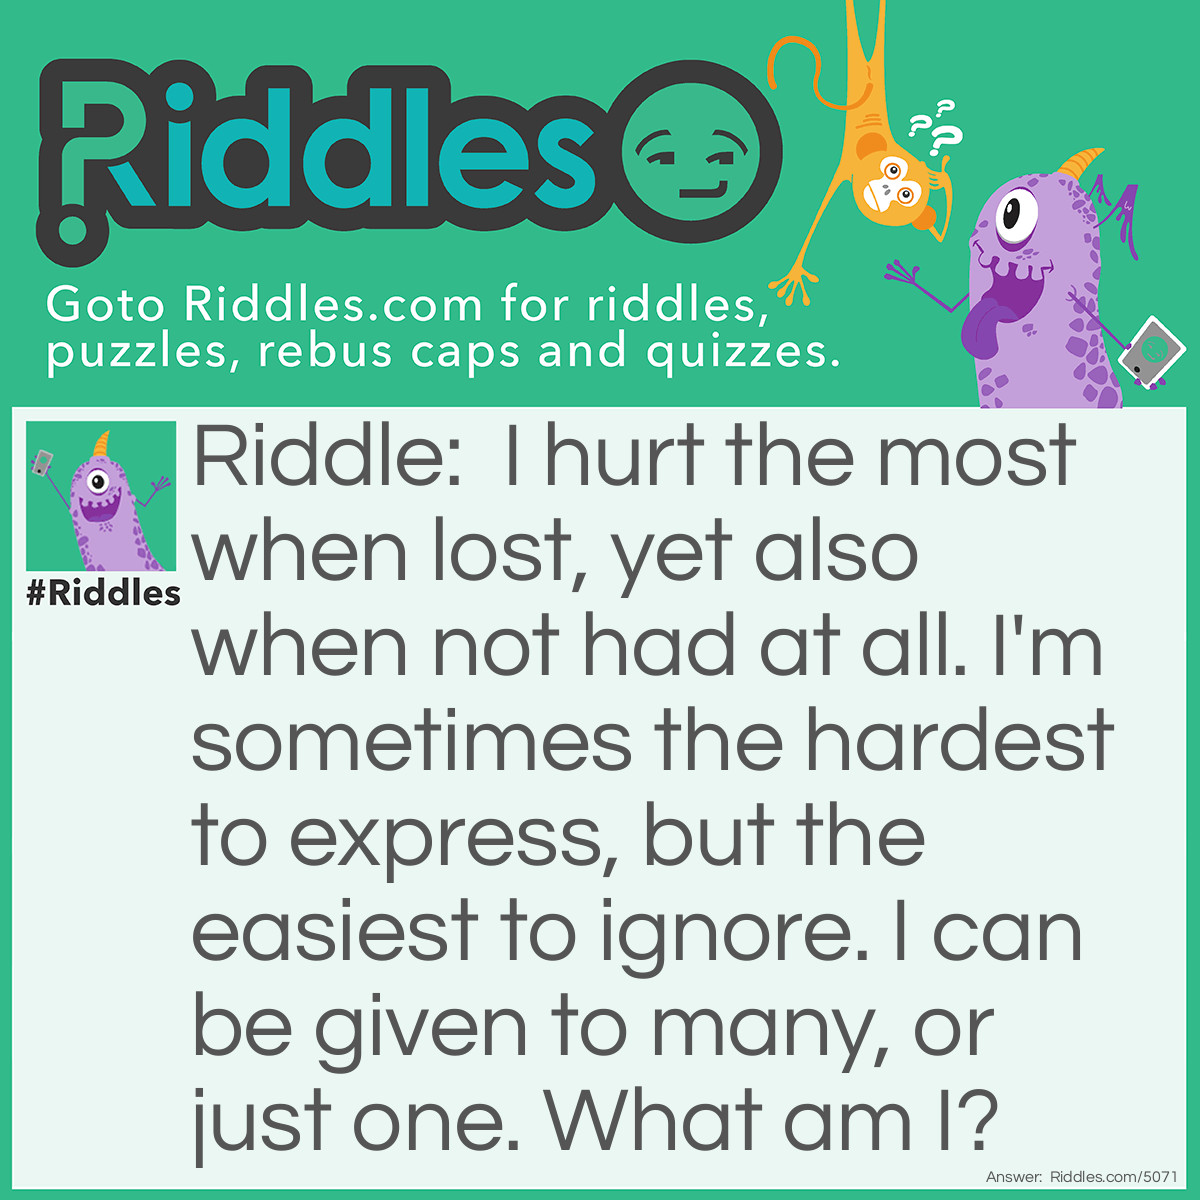 Riddle: I hurt the most when lost, yet also when not had at all. I'm sometimes the hardest to express, but the easiest to ignore. I can be given to many, or just one. What am I? Answer: Love.